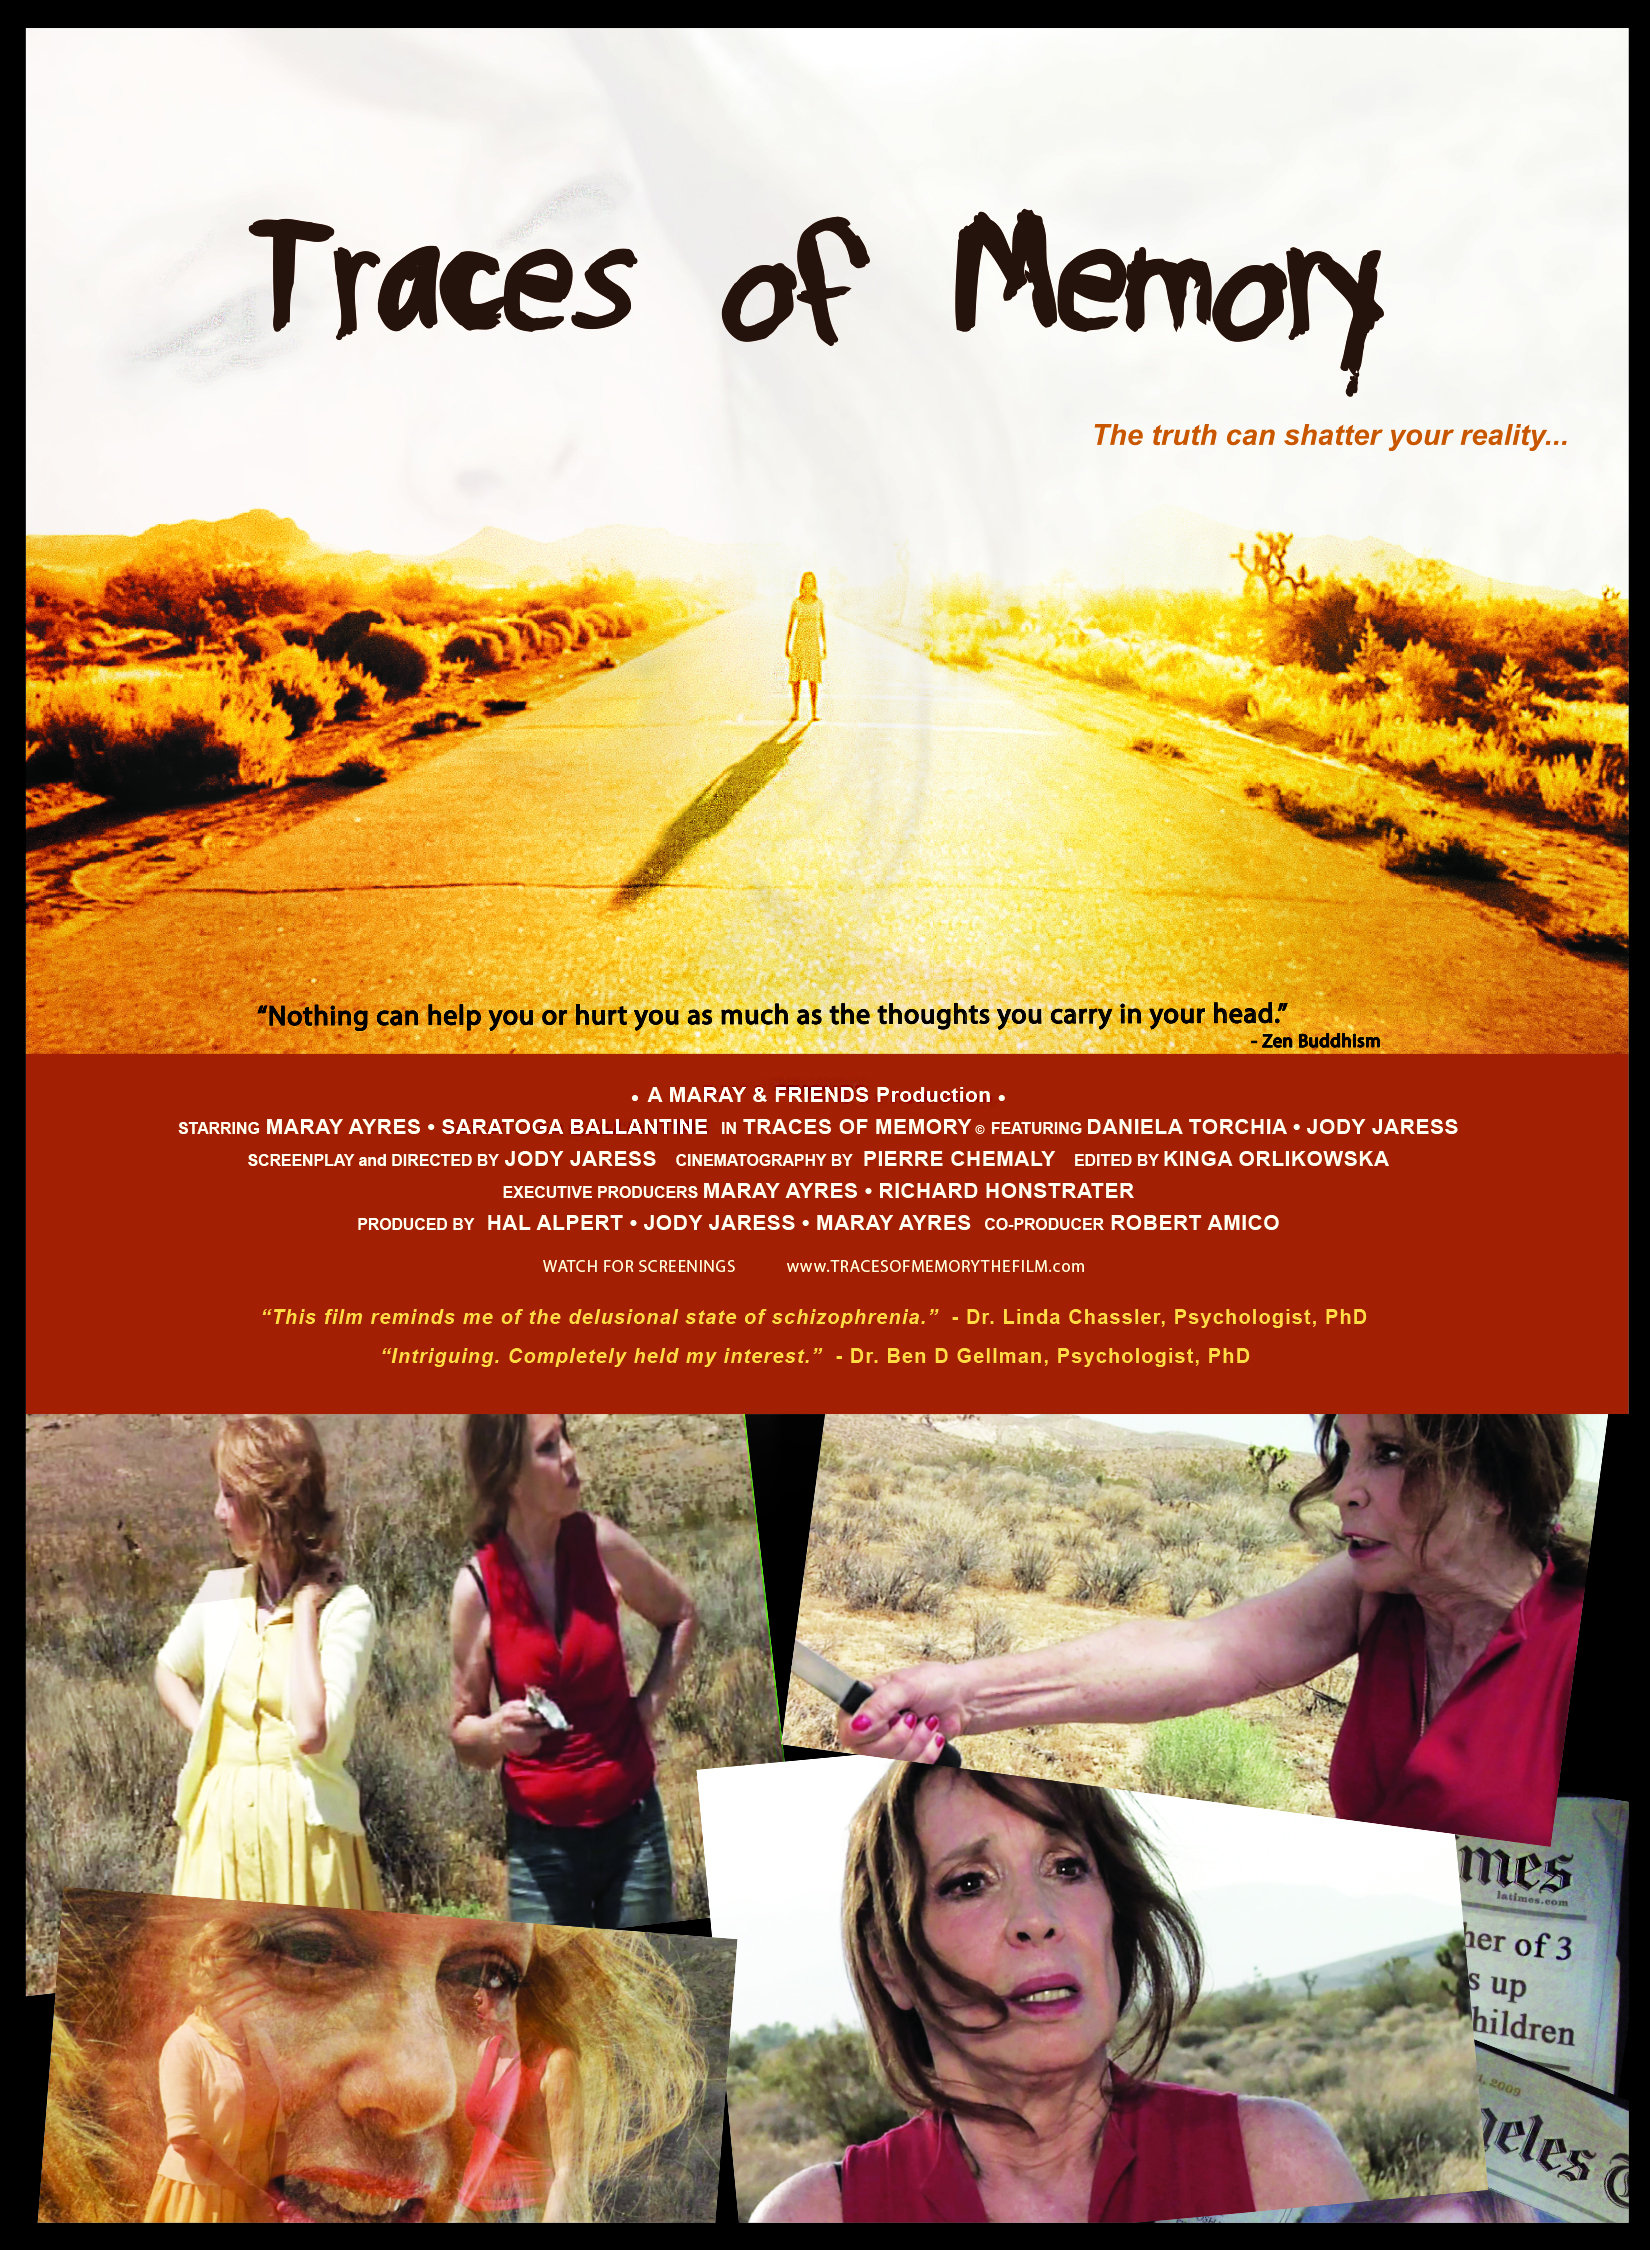 TRACES OF MEMORY a psychological drama by first time director/writer Jody Jaress starring Maray Ayres, Saratoga Ballantine and featuring Daniela Torchia